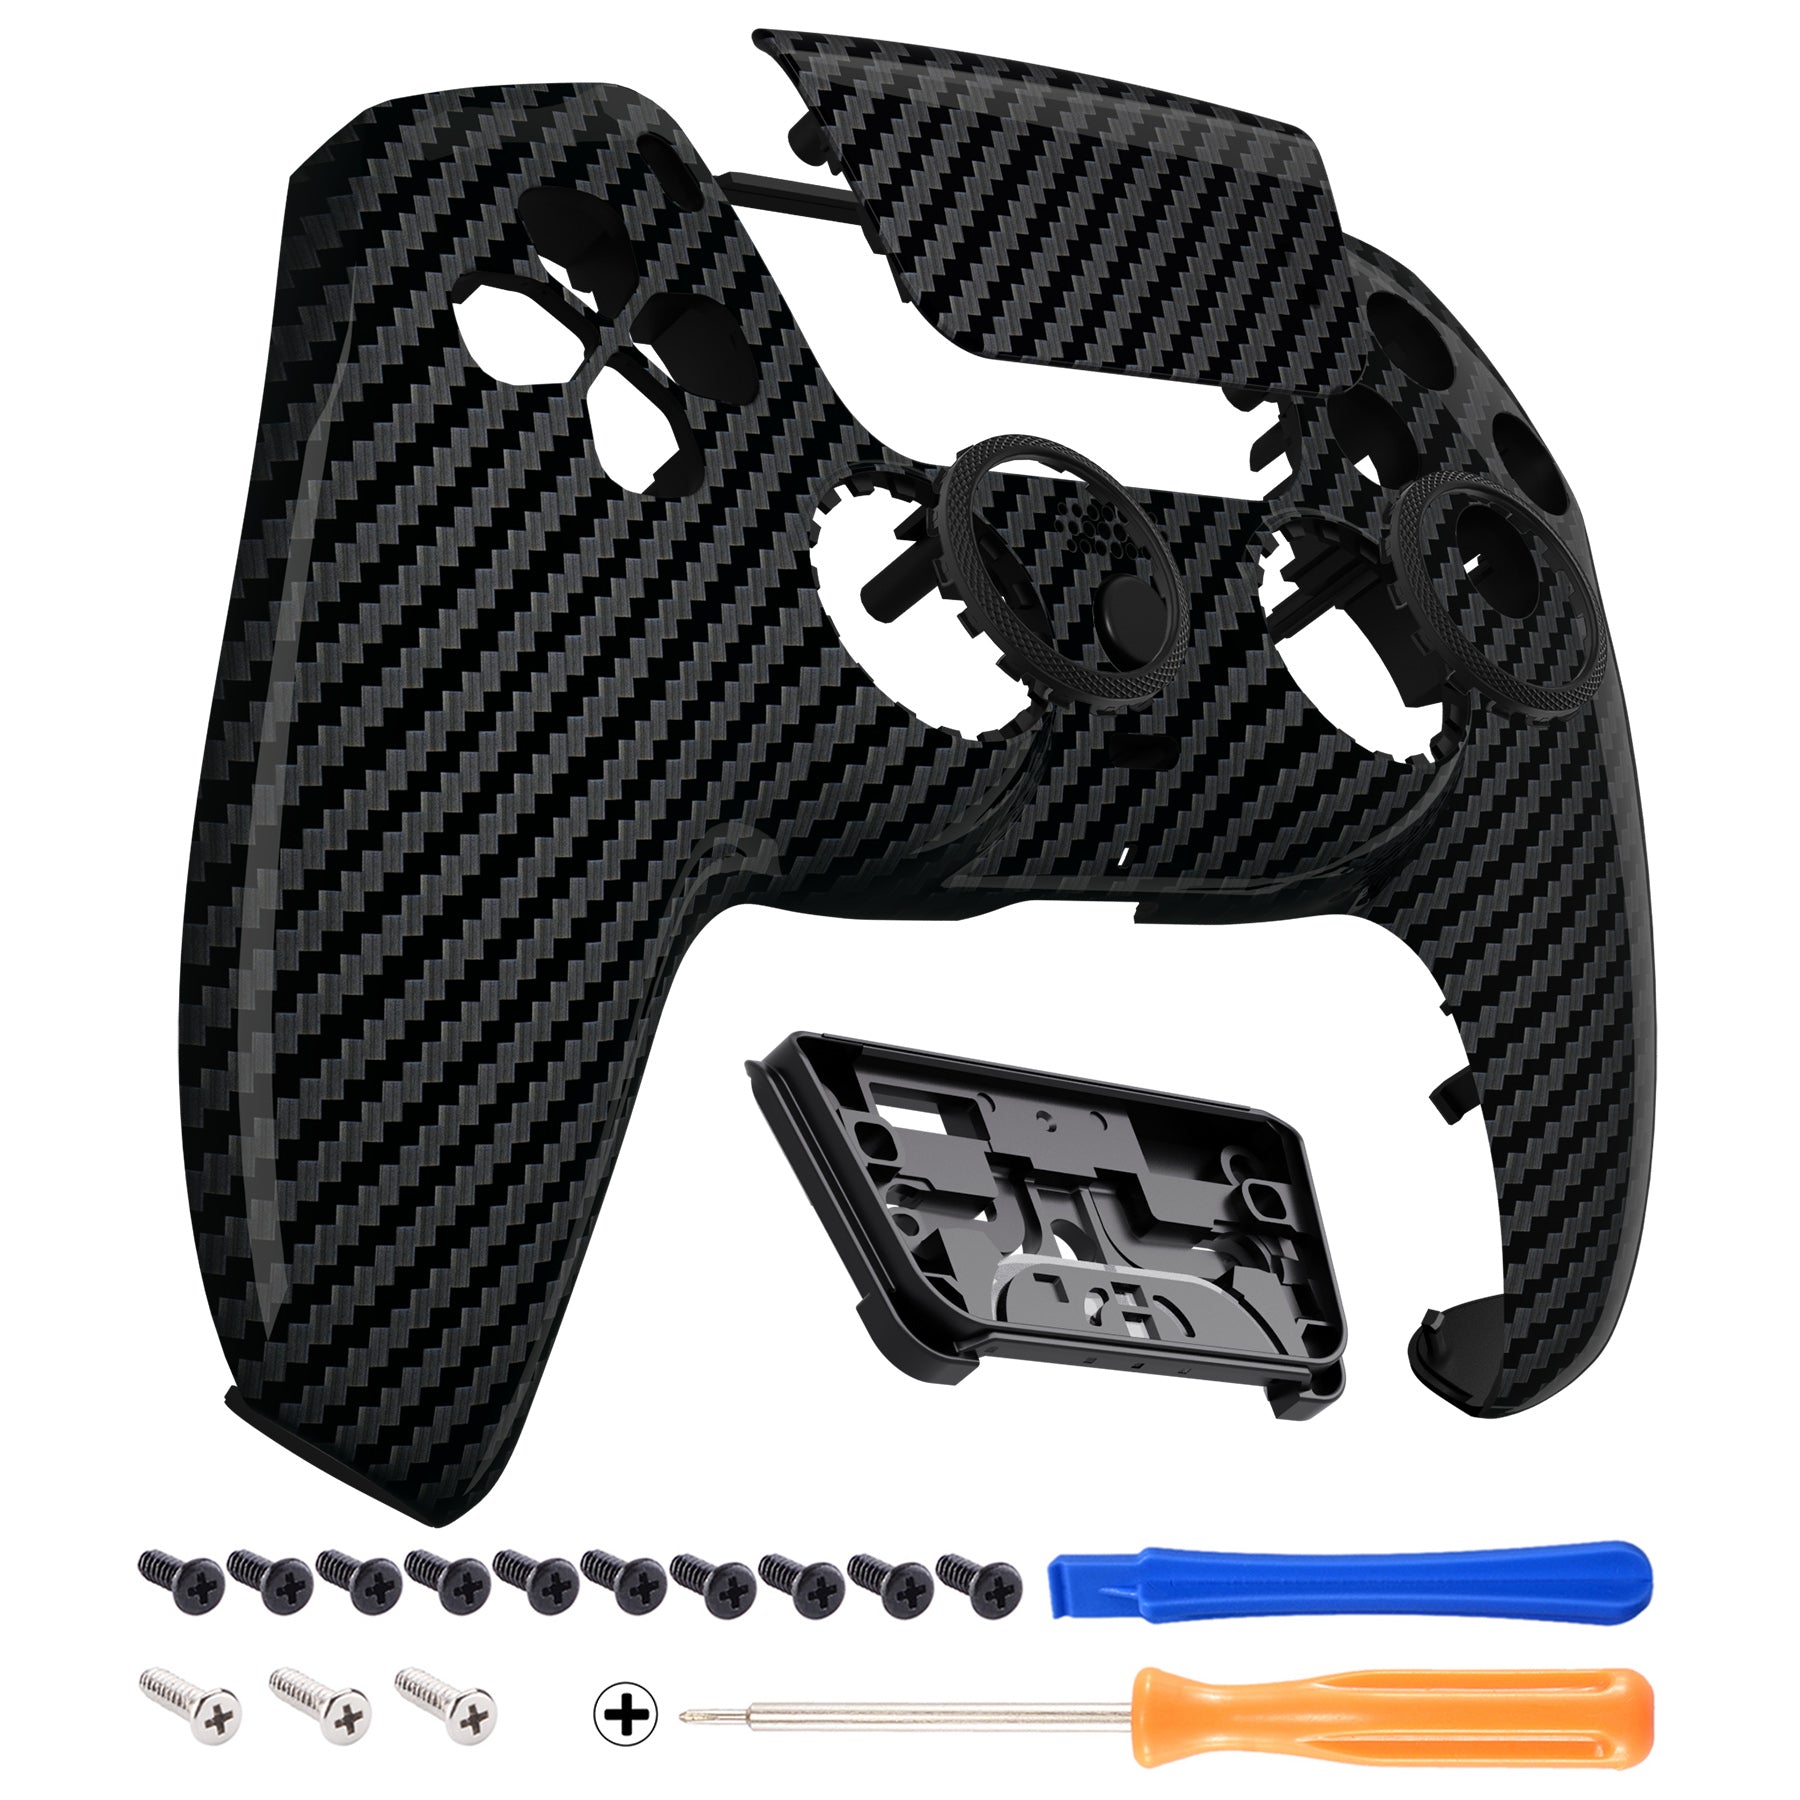 eXtremeRate LUNA Redesigned Replacement Front Shell with Touchpad  Compatible with PS5 Controller BDM-010/020/030/040 - Graphite Carbon Fiber